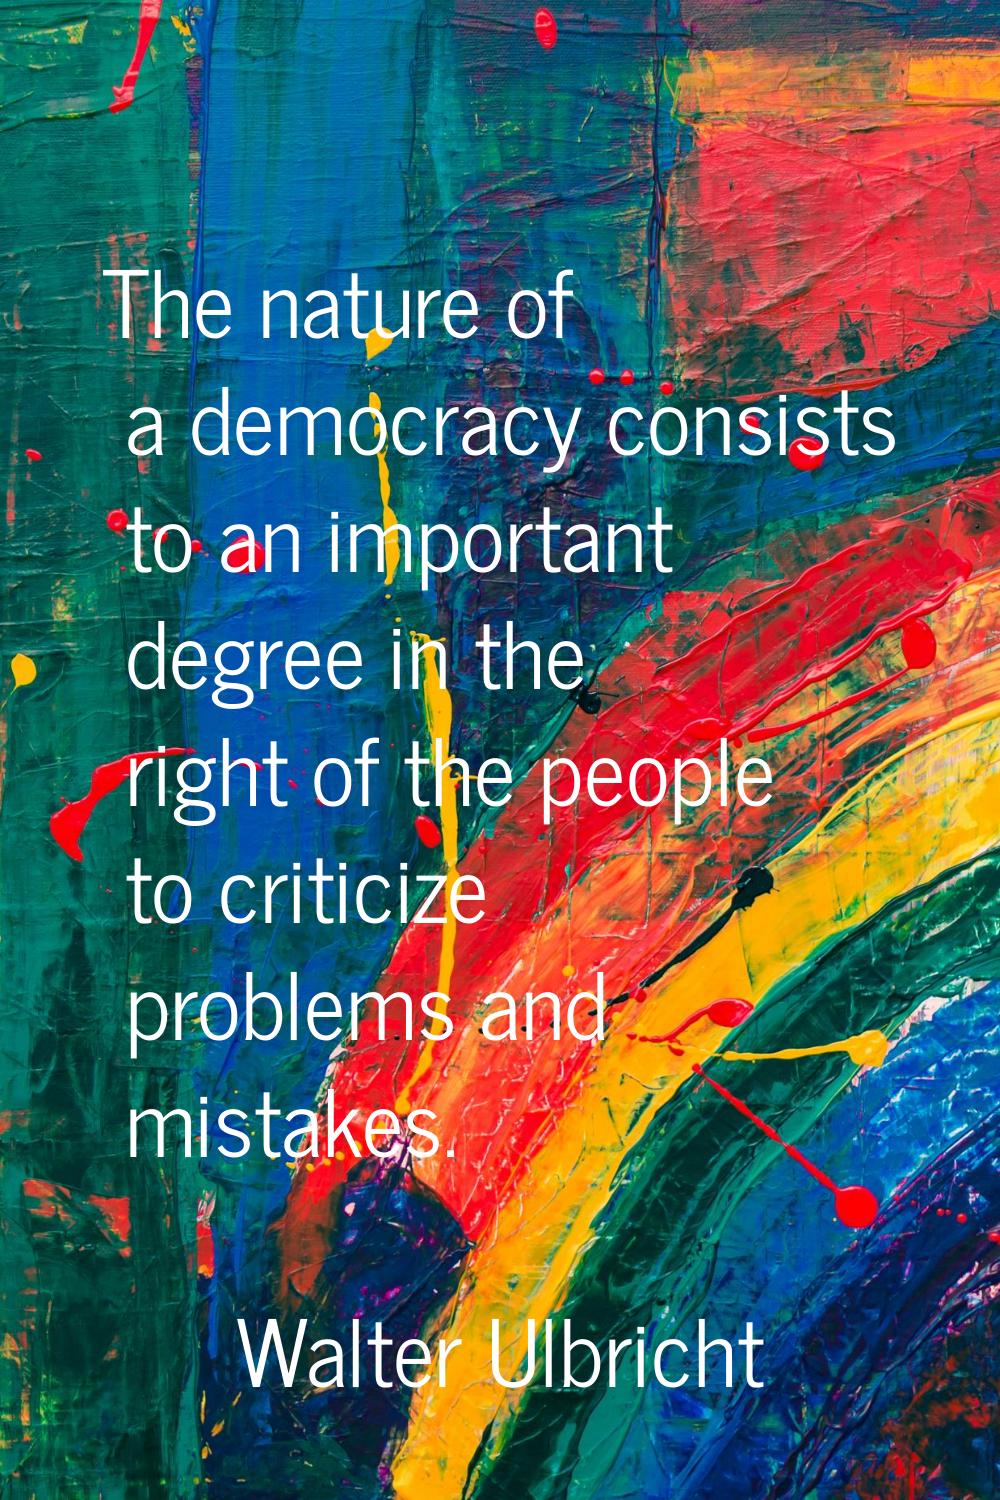 The nature of a democracy consists to an important degree in the right of the people to criticize p